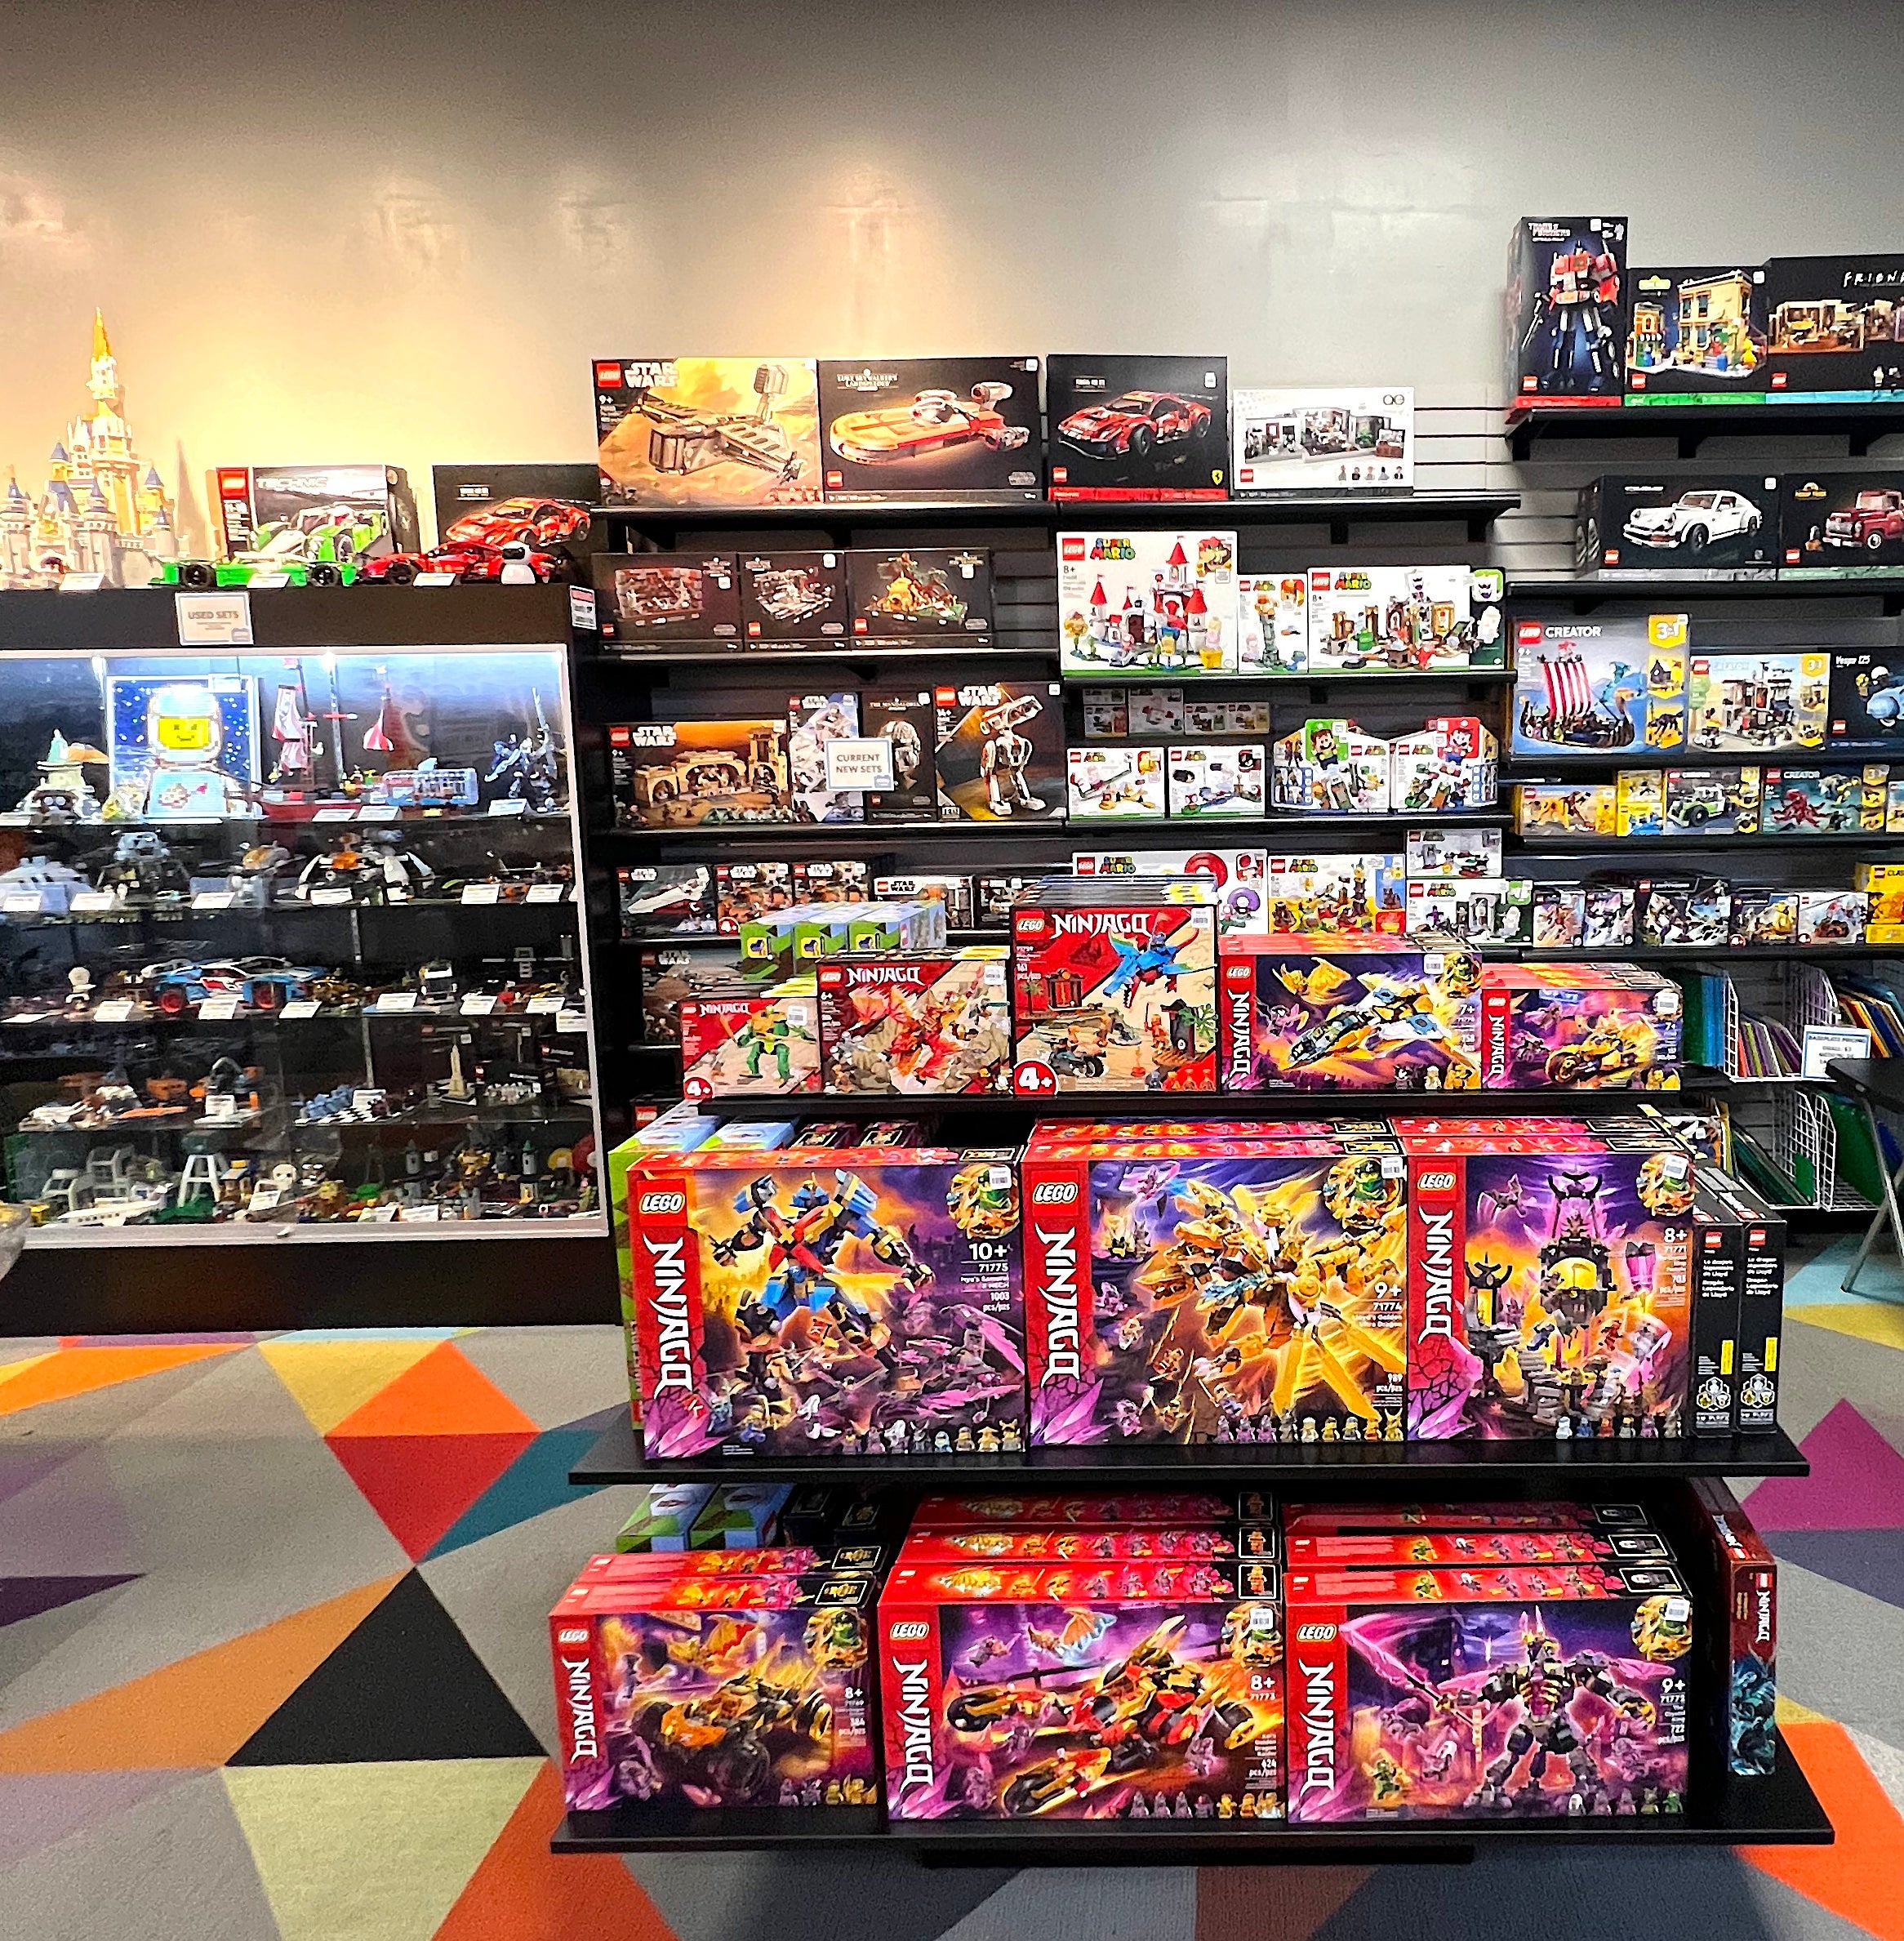 From lego sets to action figures: Anaheim's top 4 toy spots to visit